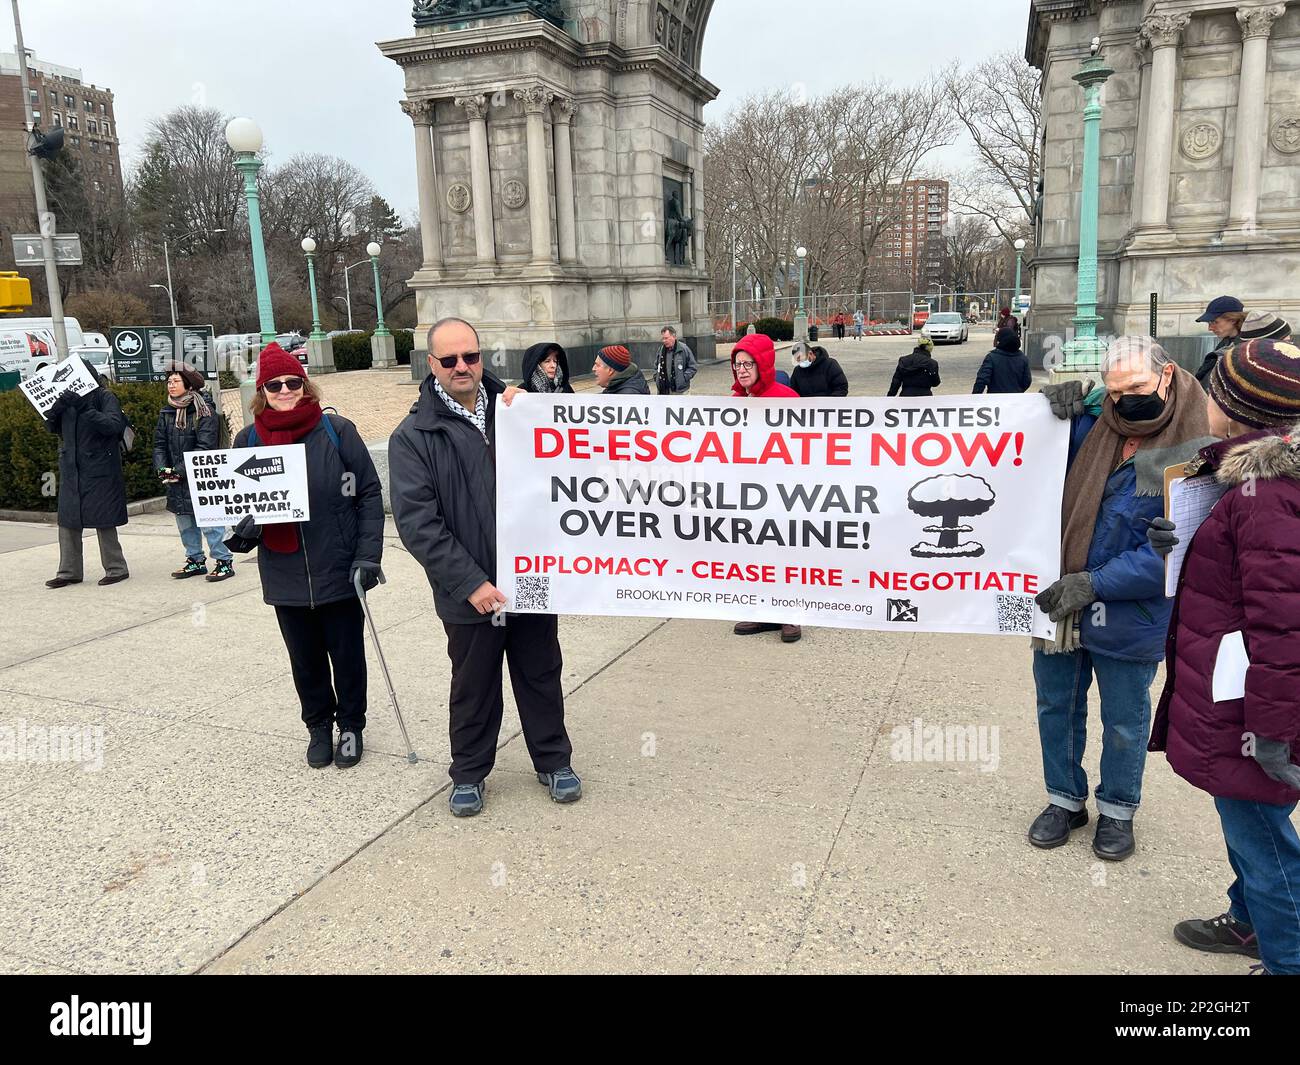 Antiwar demonstration to de-escalate the war in Ukraine and stop the slaughter of young men on both sides as well as civilians through negotiations and stop funding the military industrial complex. Rally at Grand Army Plaza in Brooklyn, New York. Stock Photo